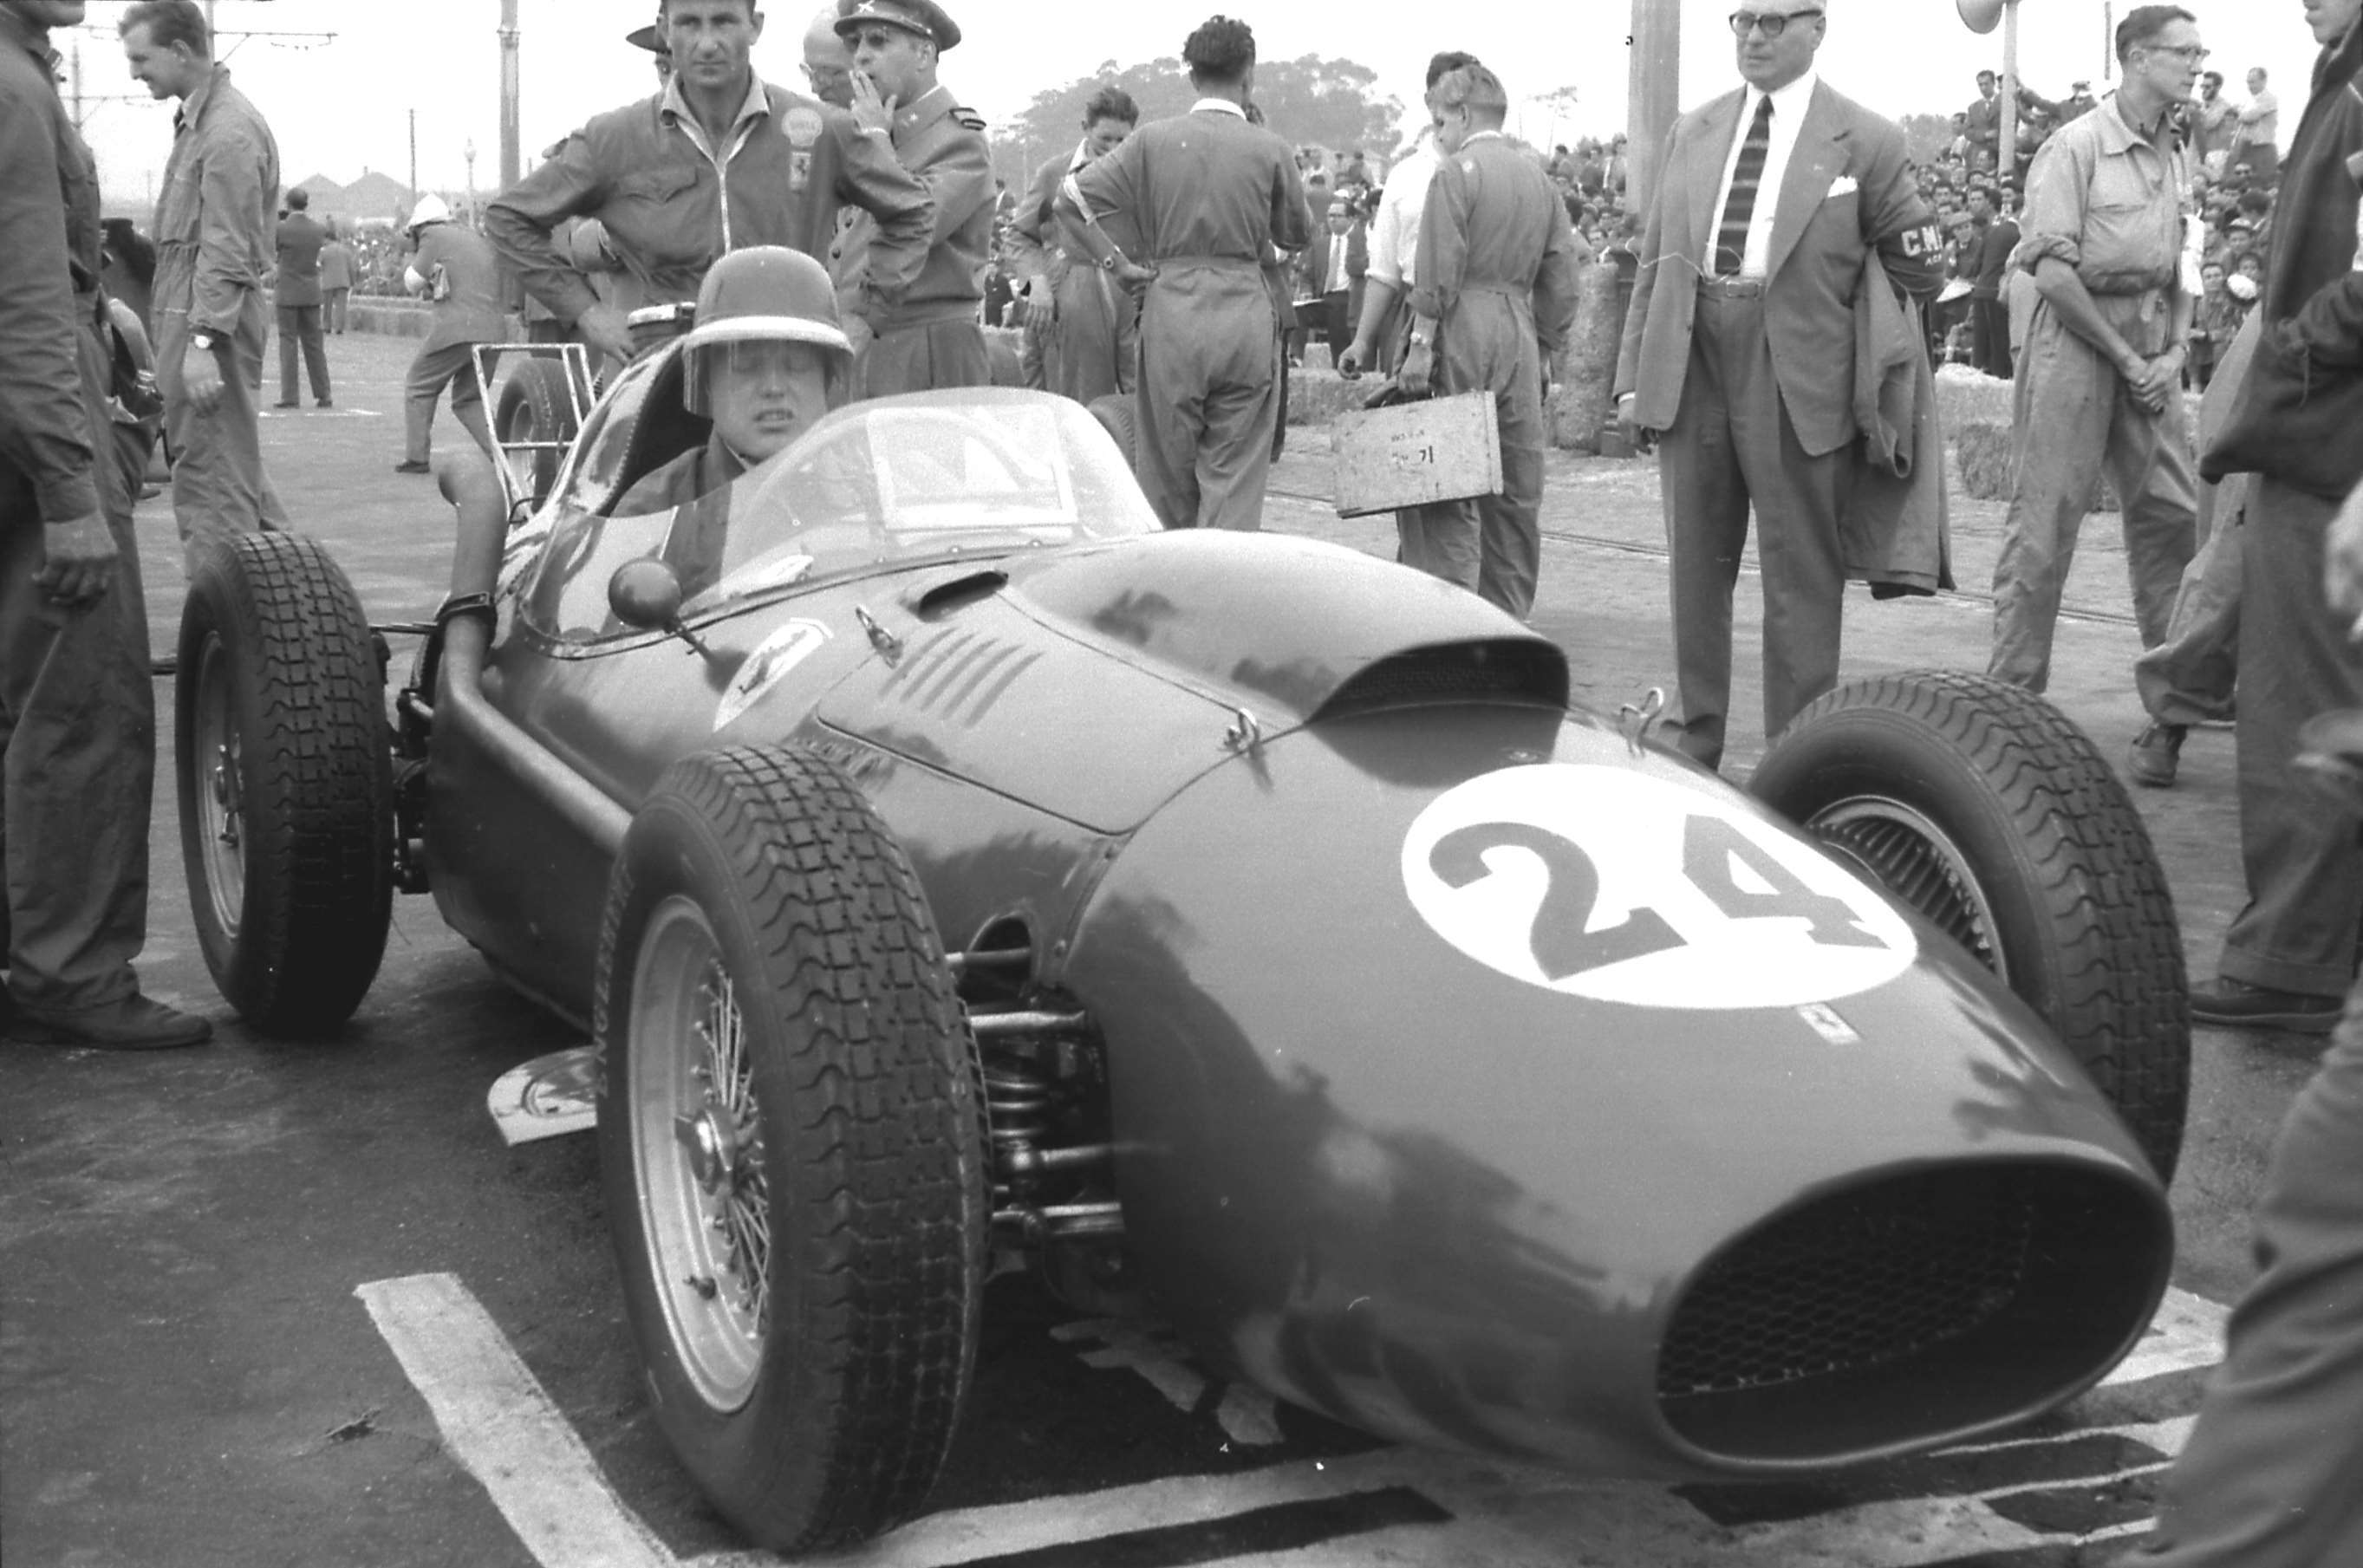 1 - Mike Hawthorn poised in his works Ferrari Dino 246 on the Oporto starting grid - 1958 Portuguese Grand Prix.  The Italian car’s heavily finned drum brakes were its Achilles heel...